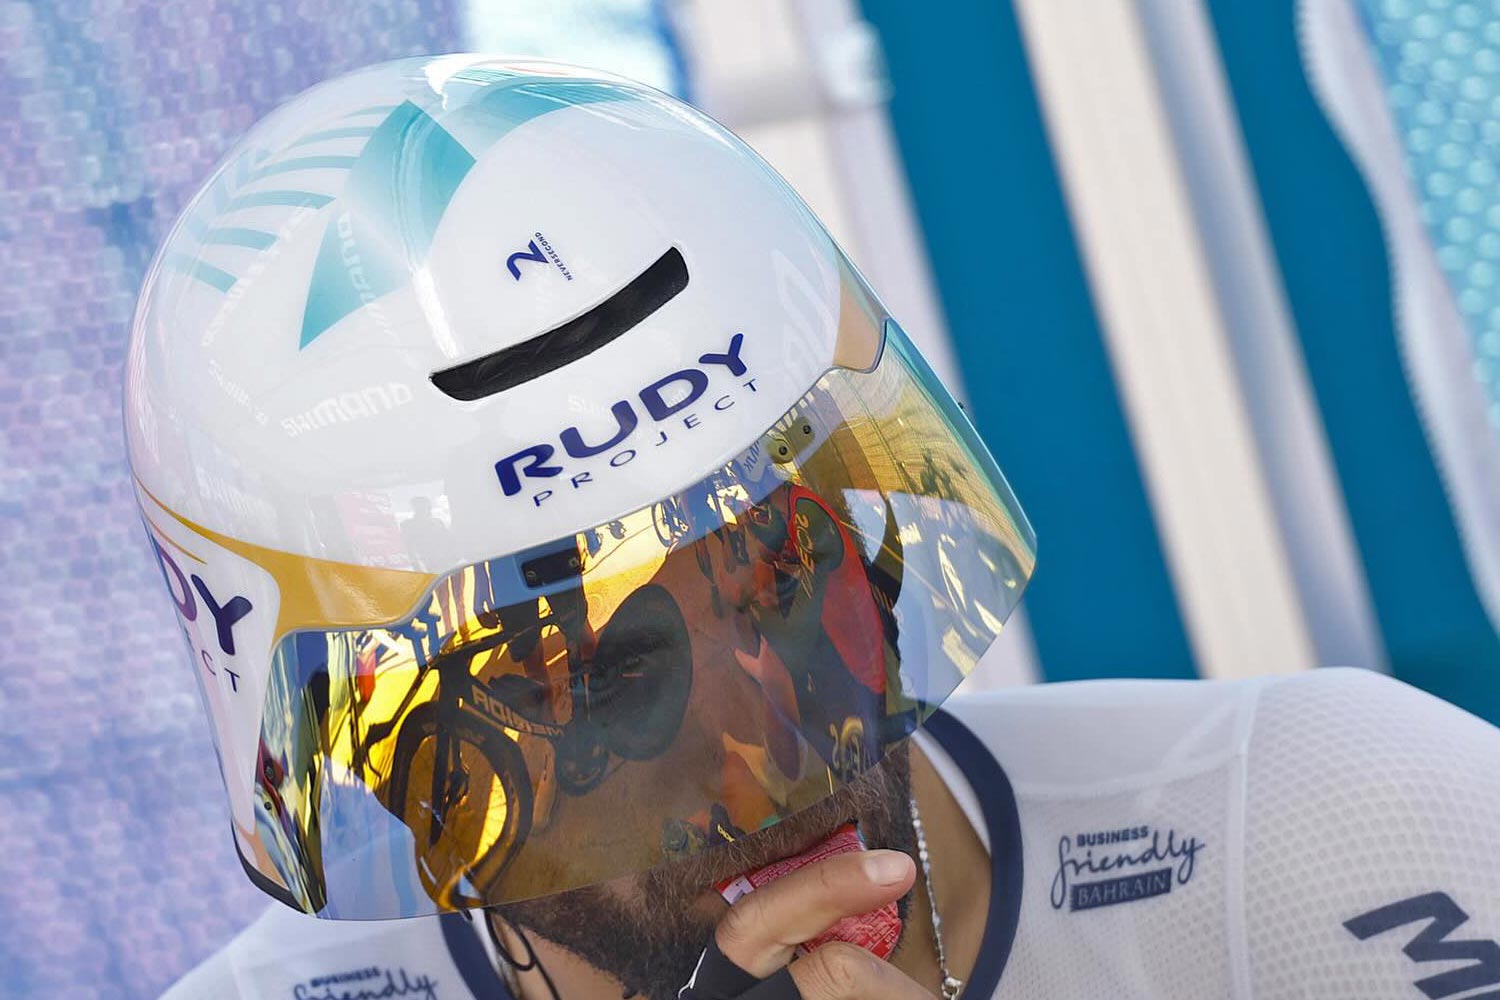 Rudy Project Wingdream time trial aero helmet front, Giro d'Italia race photos by Sprint Cycling